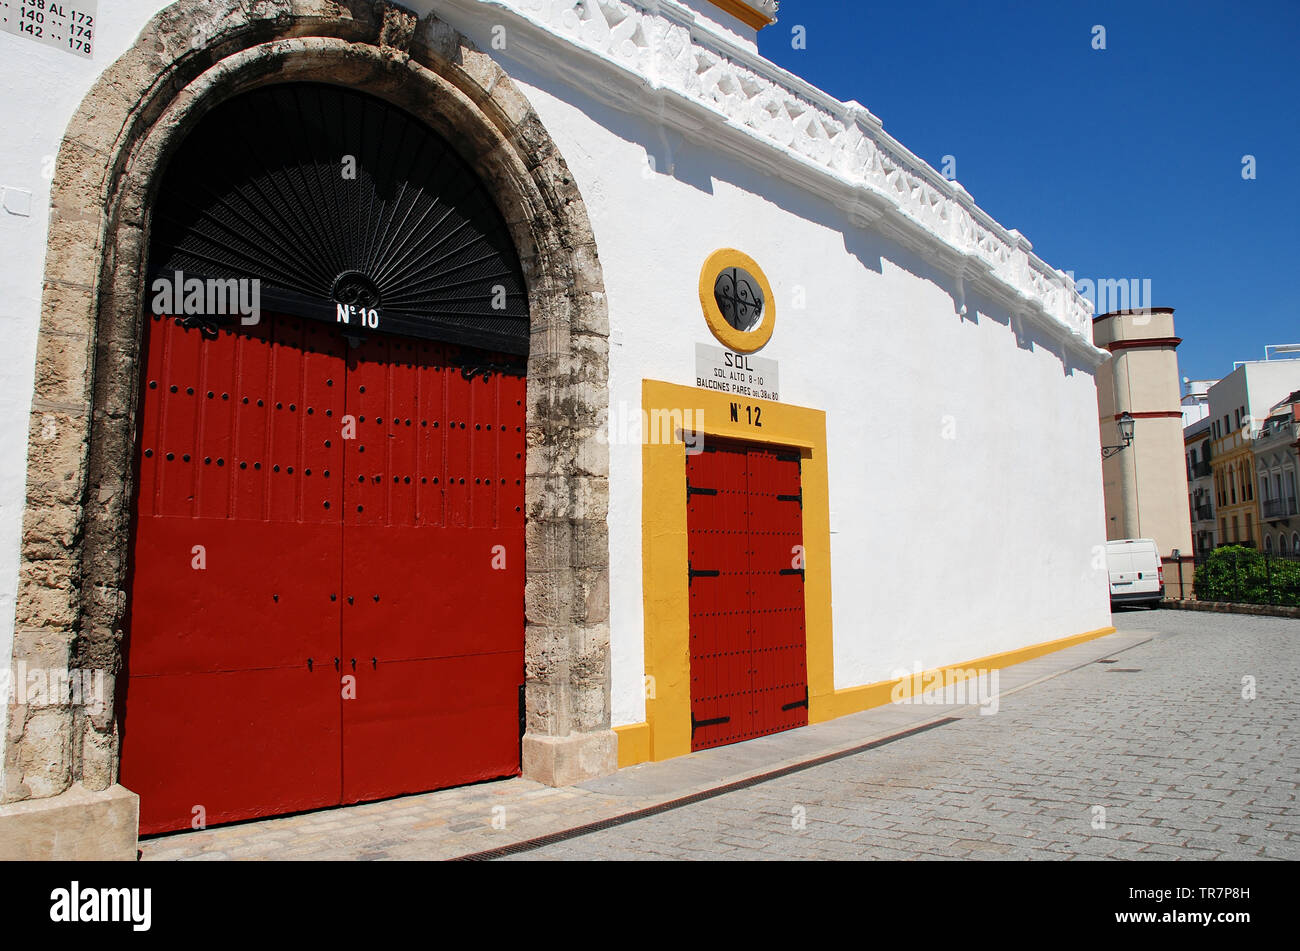 The Plaza de Toros de la Real Maestranza in Seville, Spain on April 3, 2019. The bullfighting ring has a capacity of twelve thousand people. Stock Photo